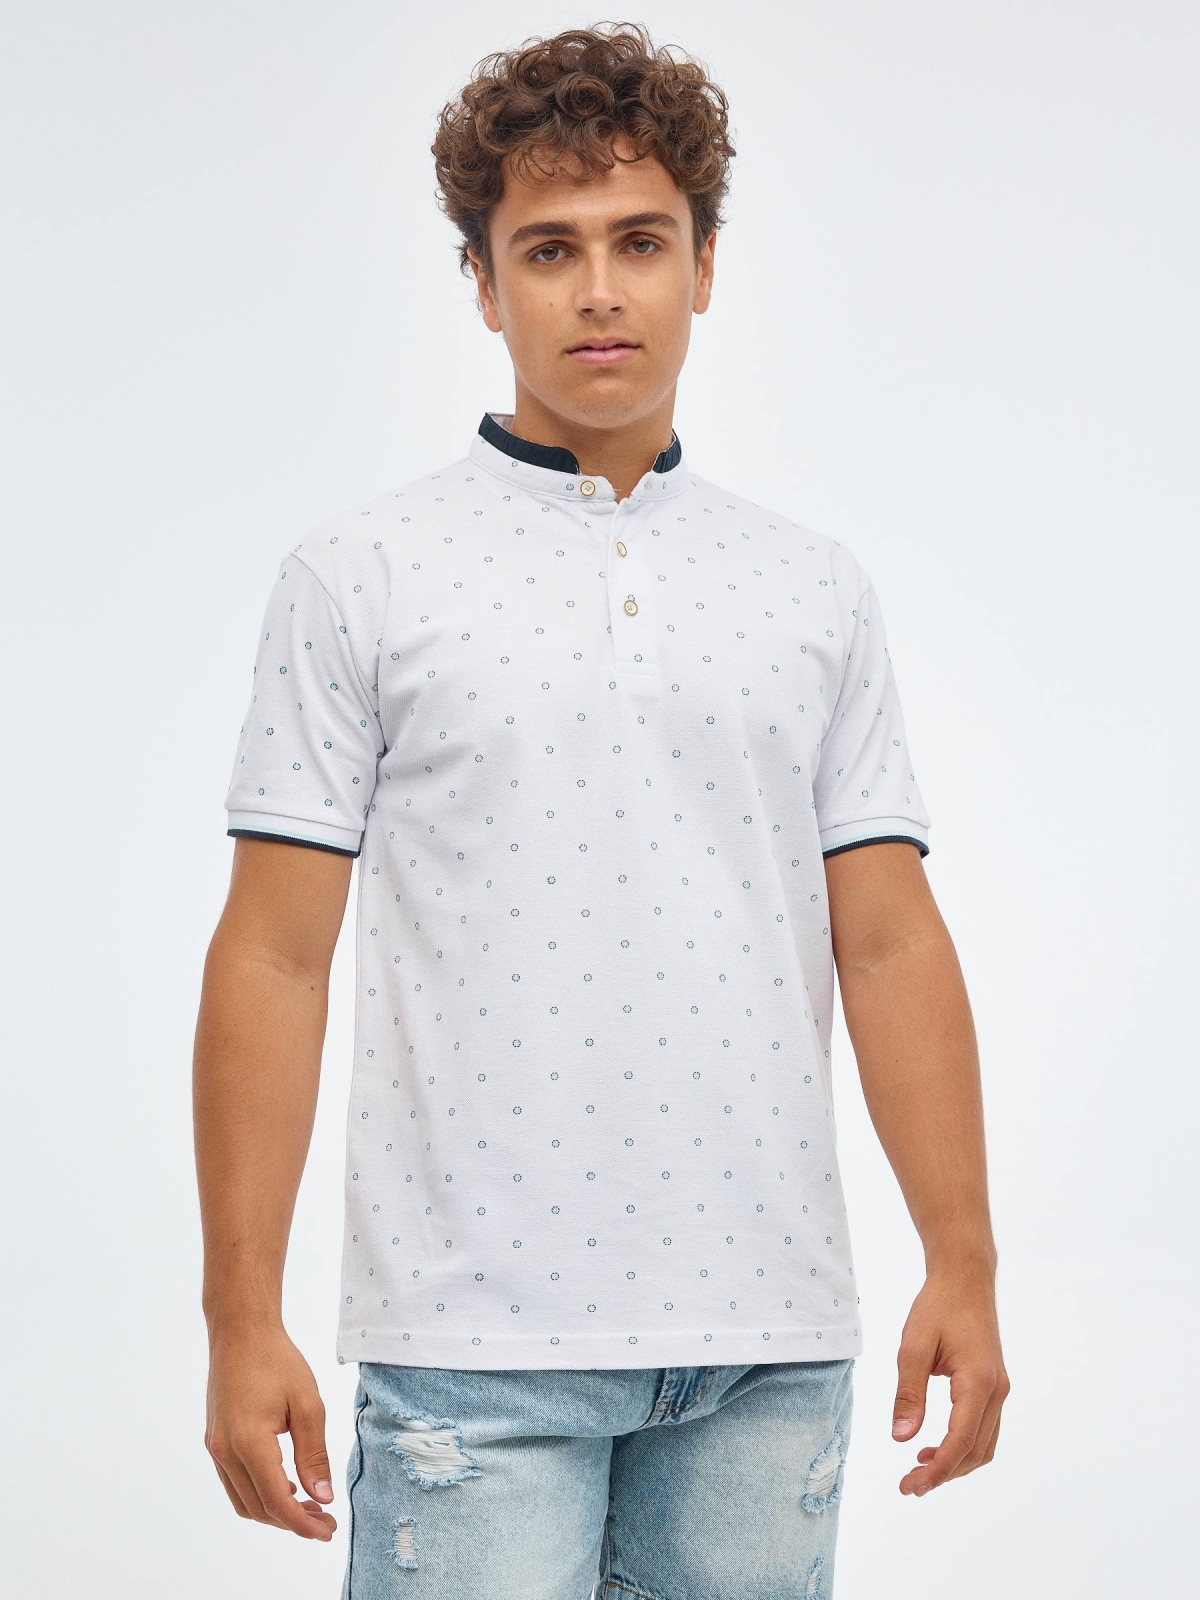 Mandarin collar polo shirt white middle front view